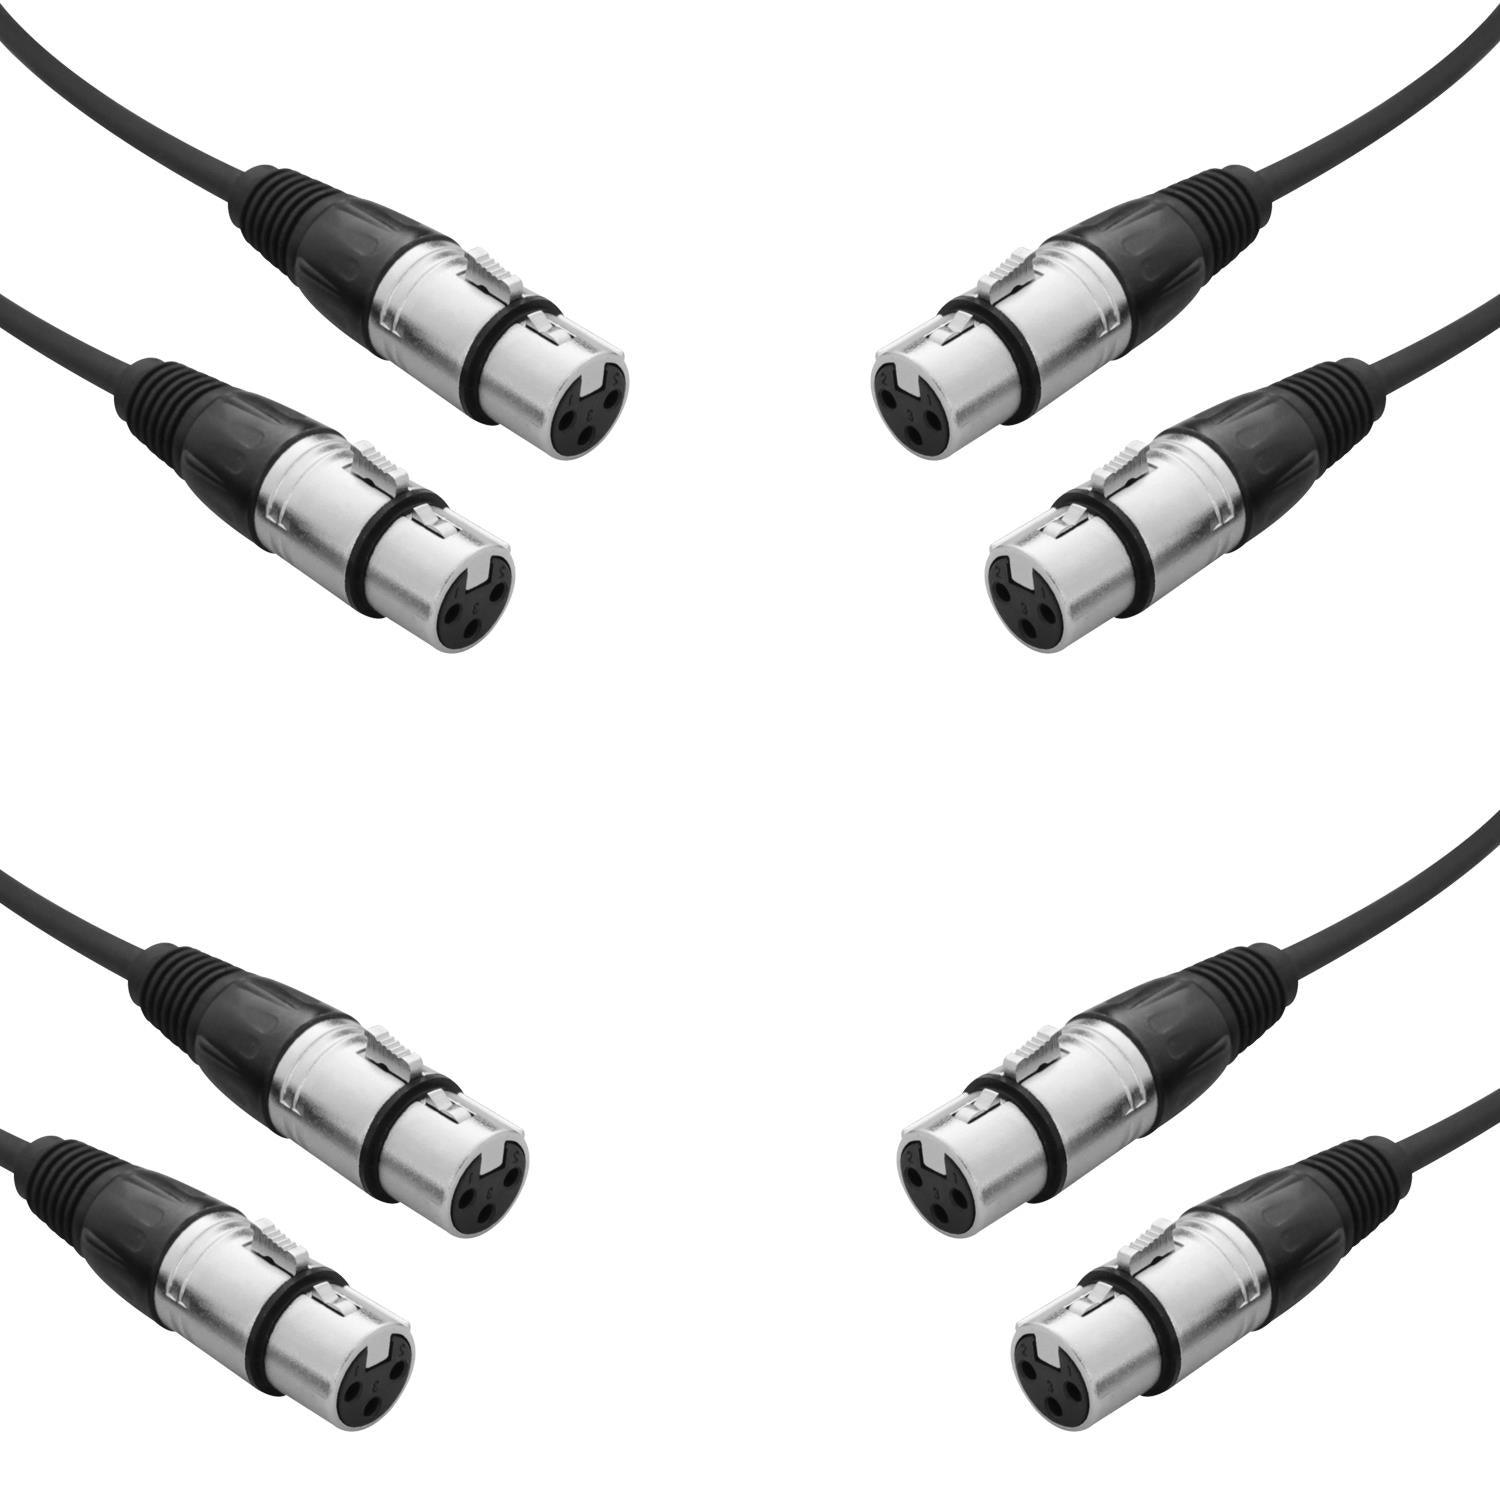 4 x W Audio 0.25M XLR Female to Female Gender Changer Adaptor Lead Cable - DY Pro Audio